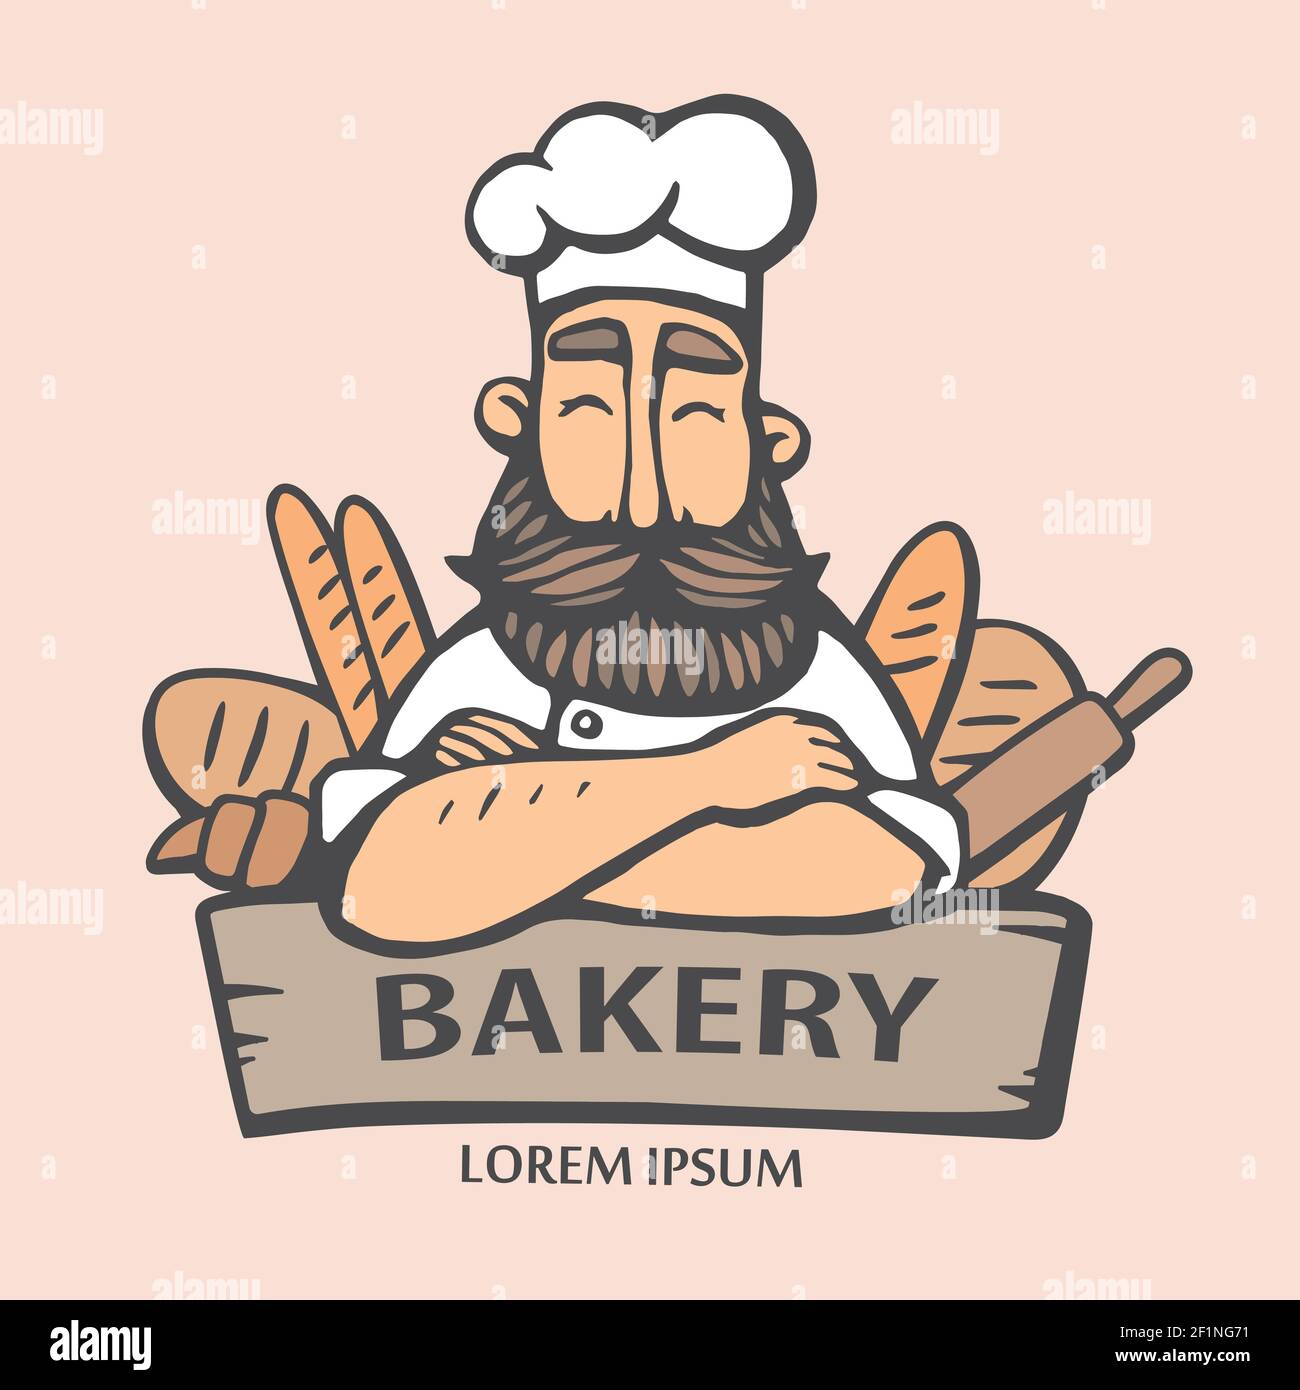 Bakery logo. Hand drawn vector illustration of chief-cooker with a mustache and beard in with a bread. chief logo. Stock Vector